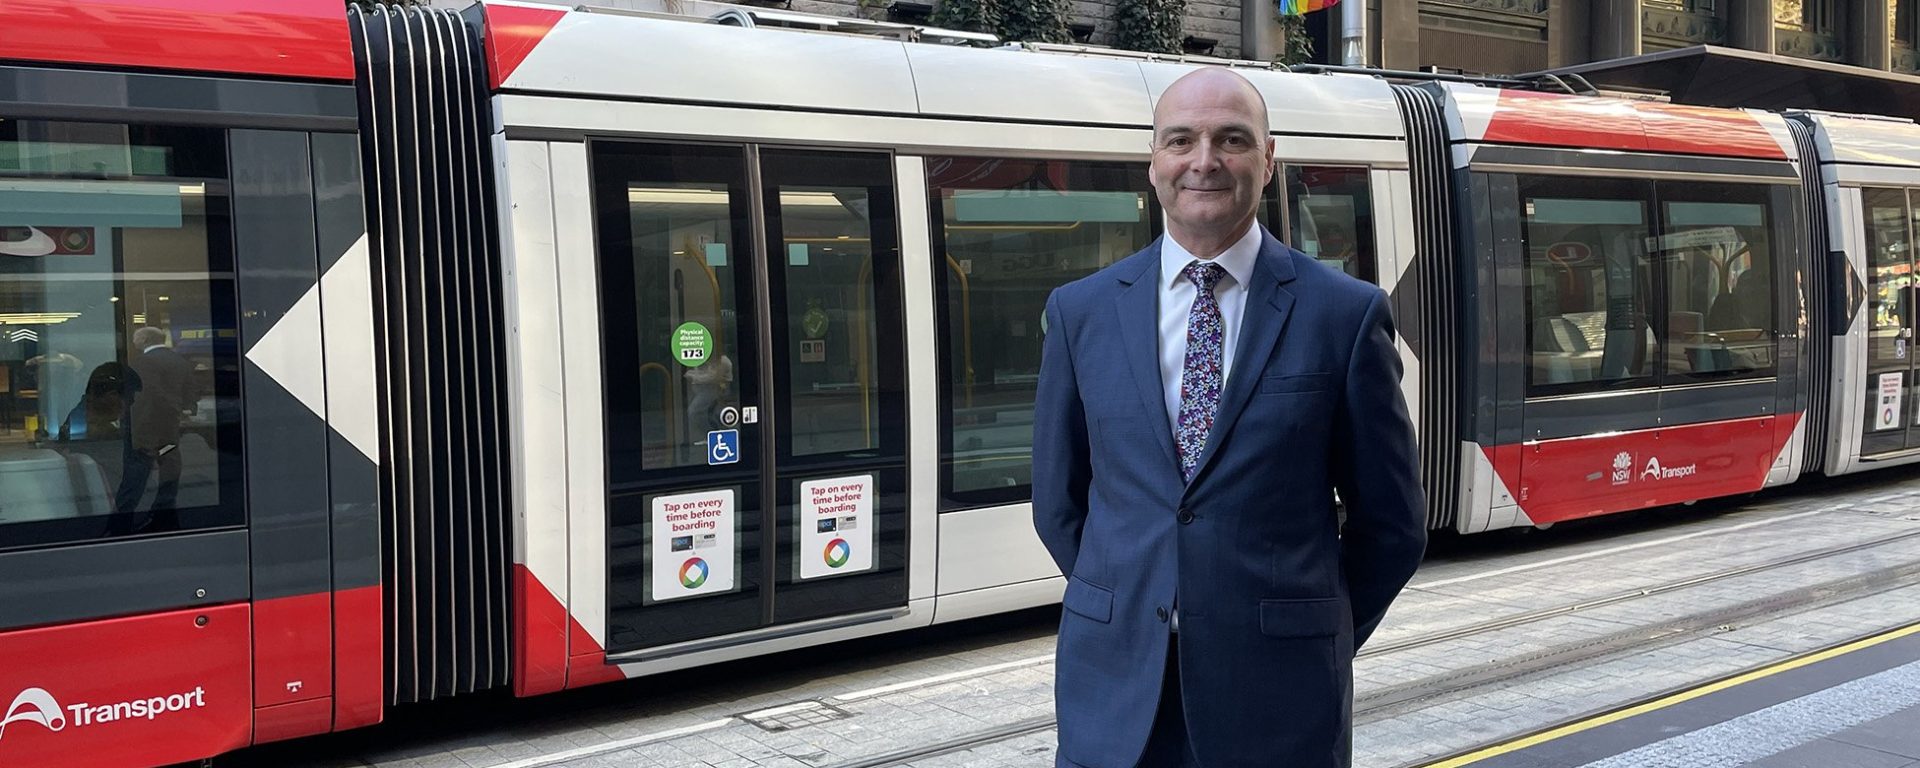 Huw Bridges, Chief Safety and Assurance Officer, pictured in front of Light Rail vehicle